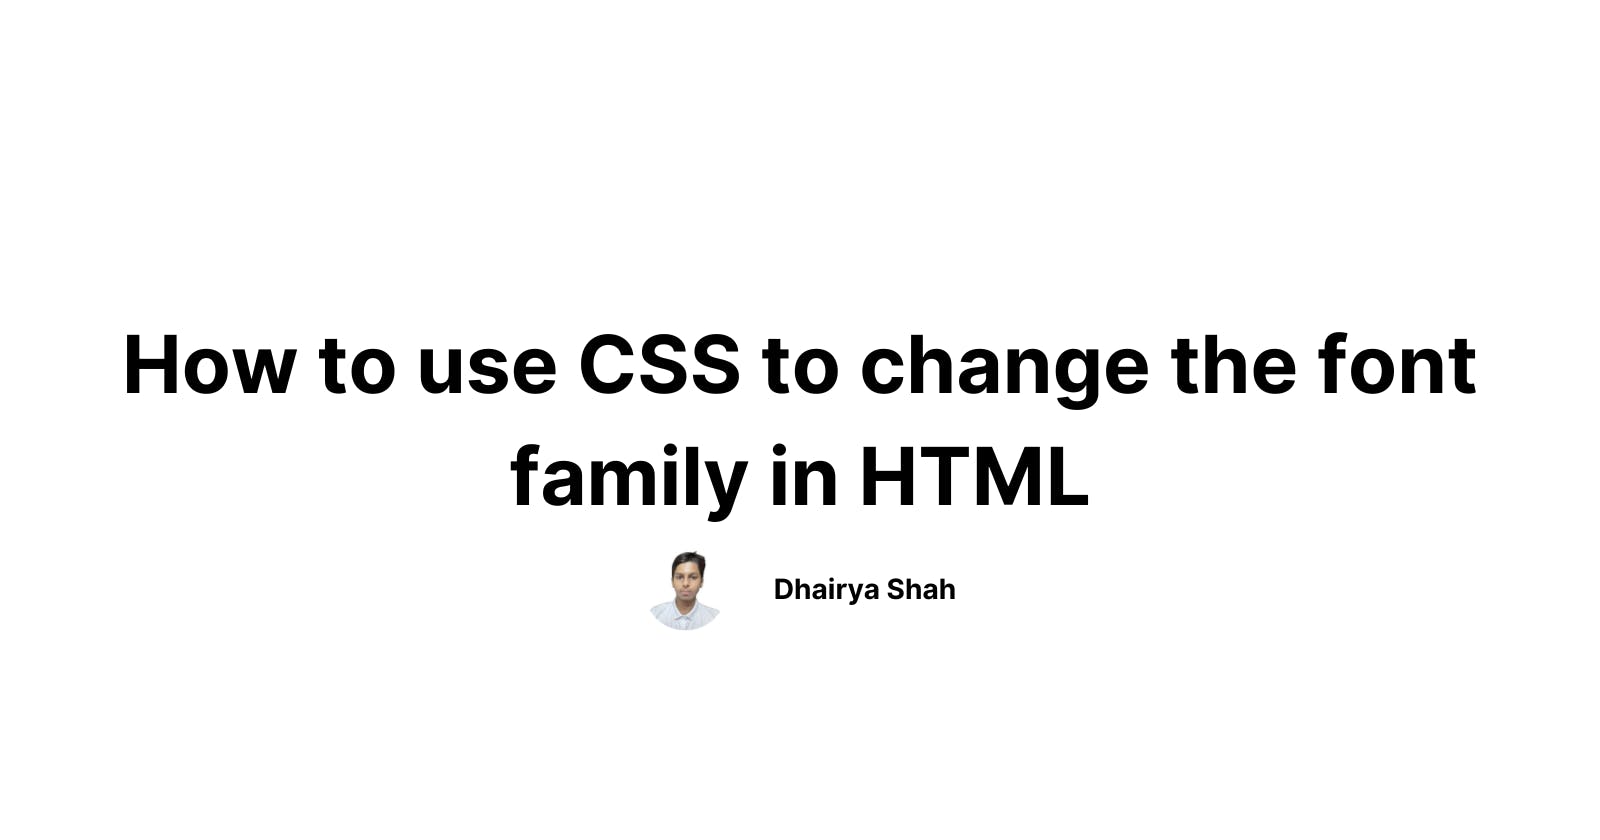 How to use CSS to change the font family in HTML